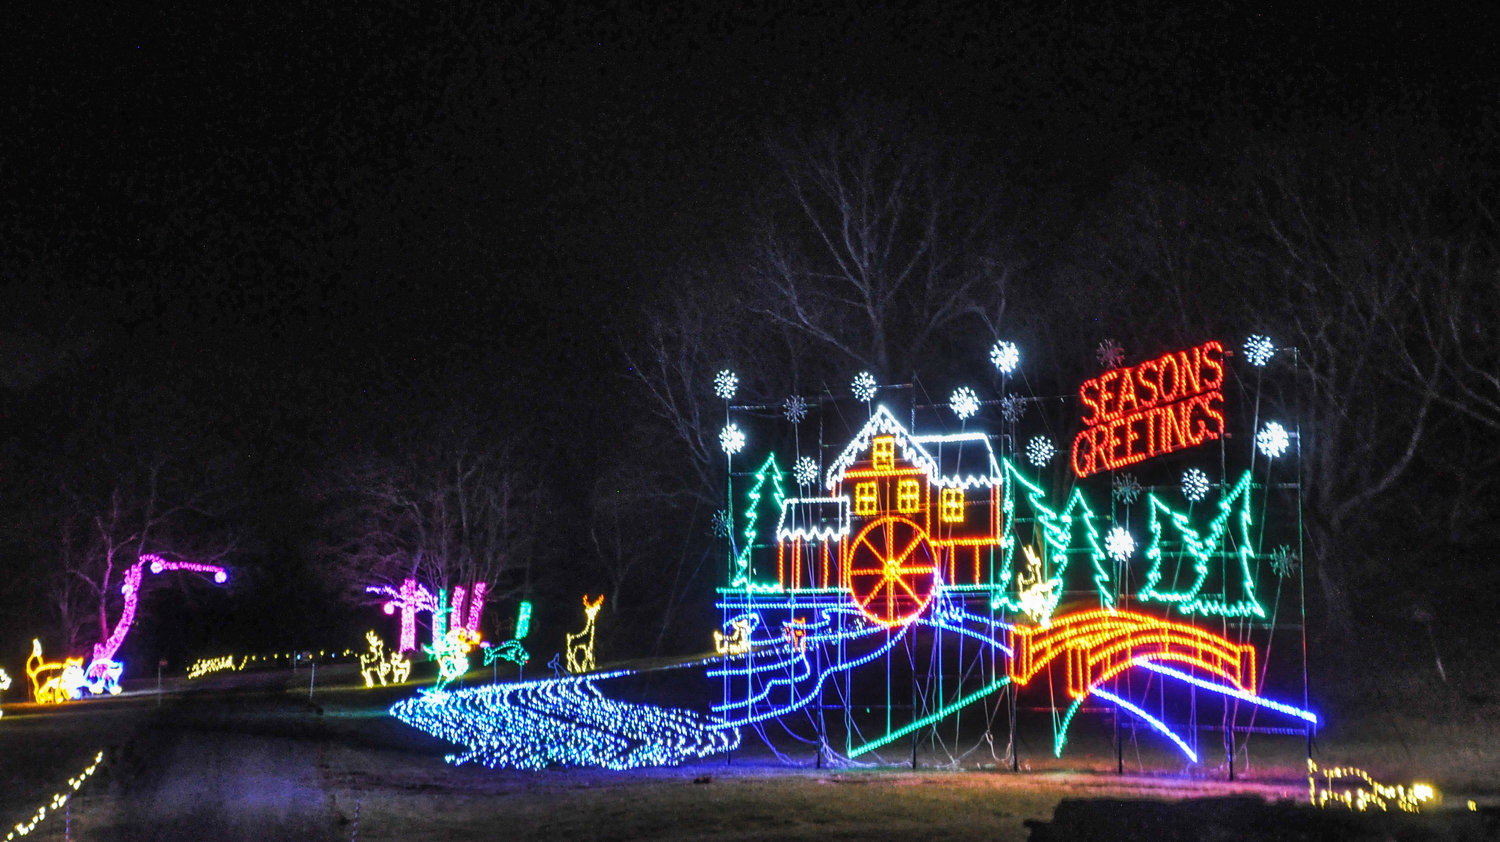 Bethel Woods came through with their promise of “bigger, better and brighter” and the holiday display is a magical trip down Candy Cane Lane.